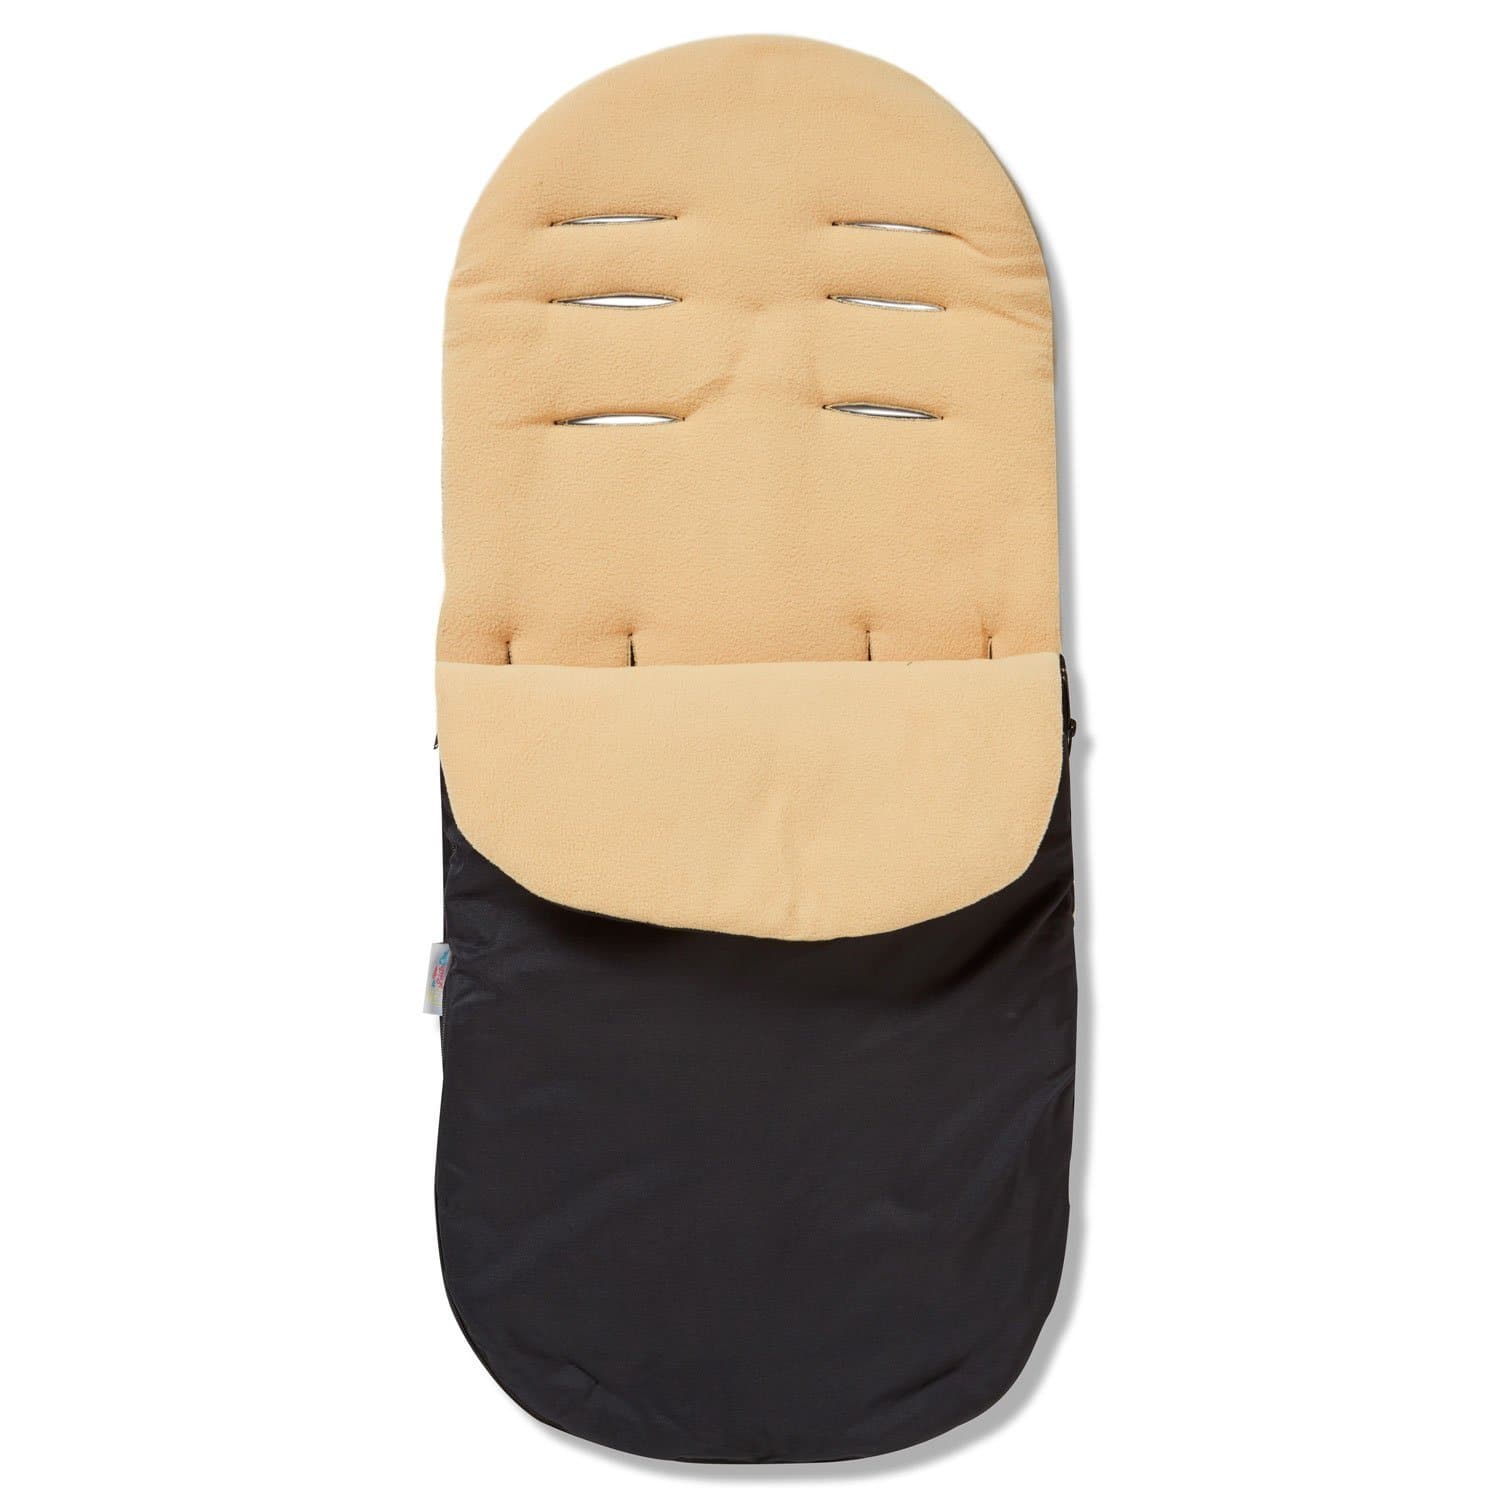 Footmuff / Cosy Toes Compatible with Kiddicare.com - Sand / Fits All Models | For Your Little One